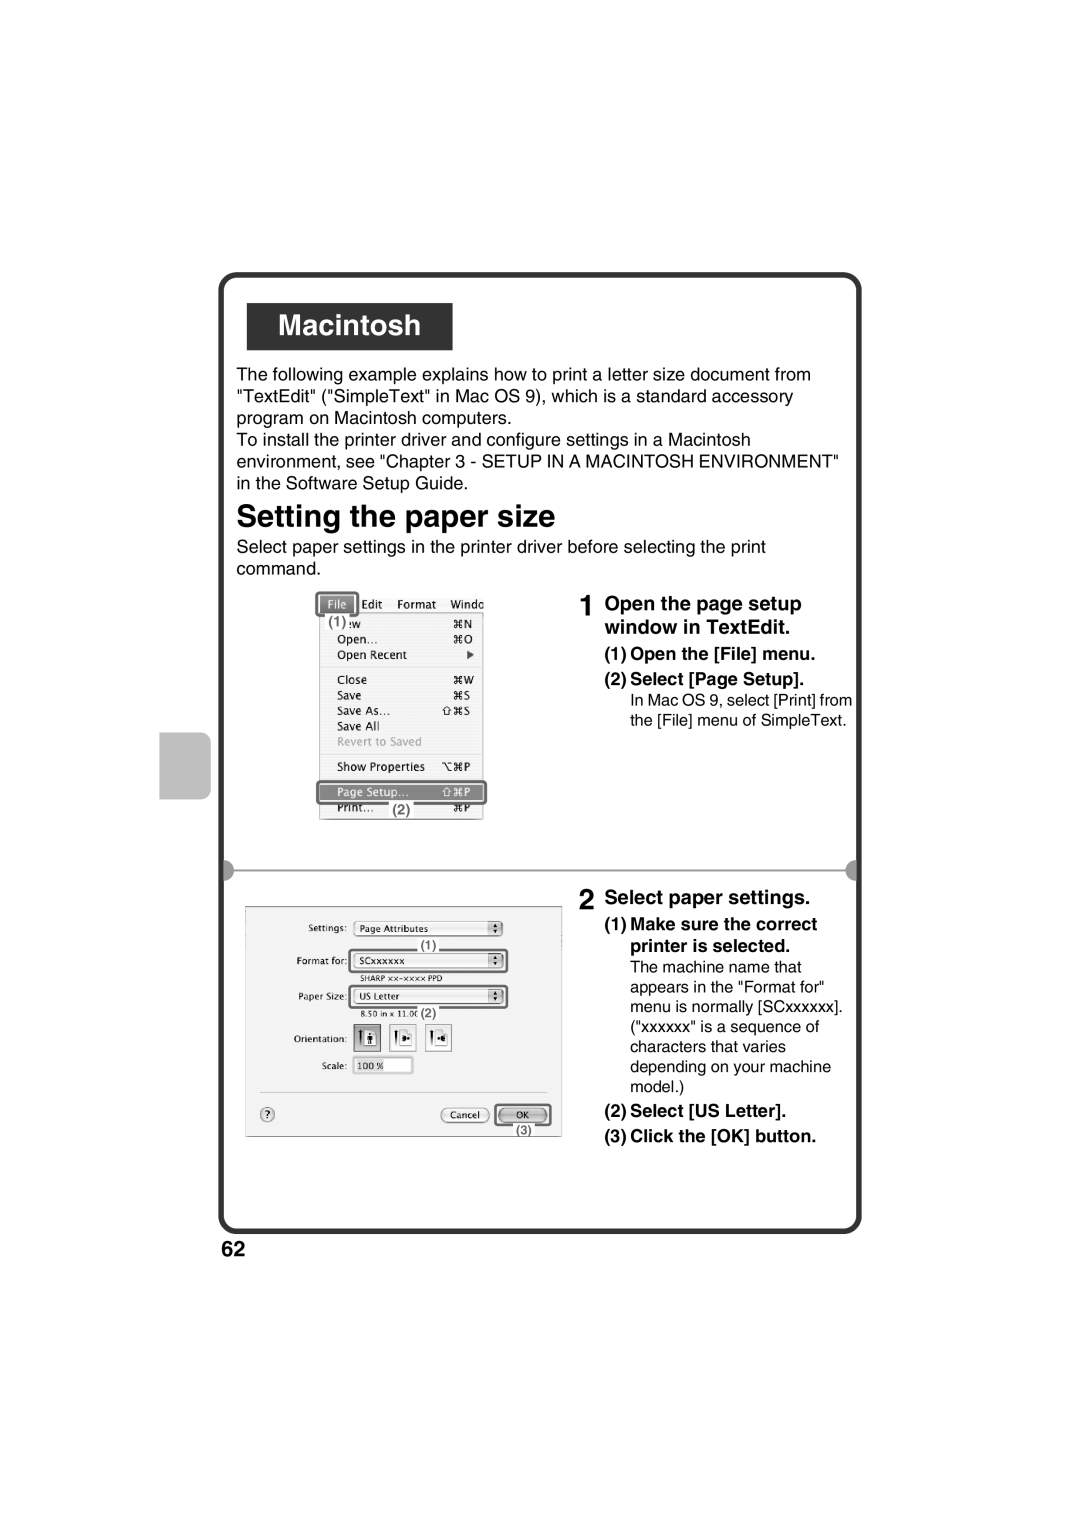 Sharp MX-B401 quick start Setting the paper size, Macintosh, Open the page setup, window in TextEdit, Select paper settings 